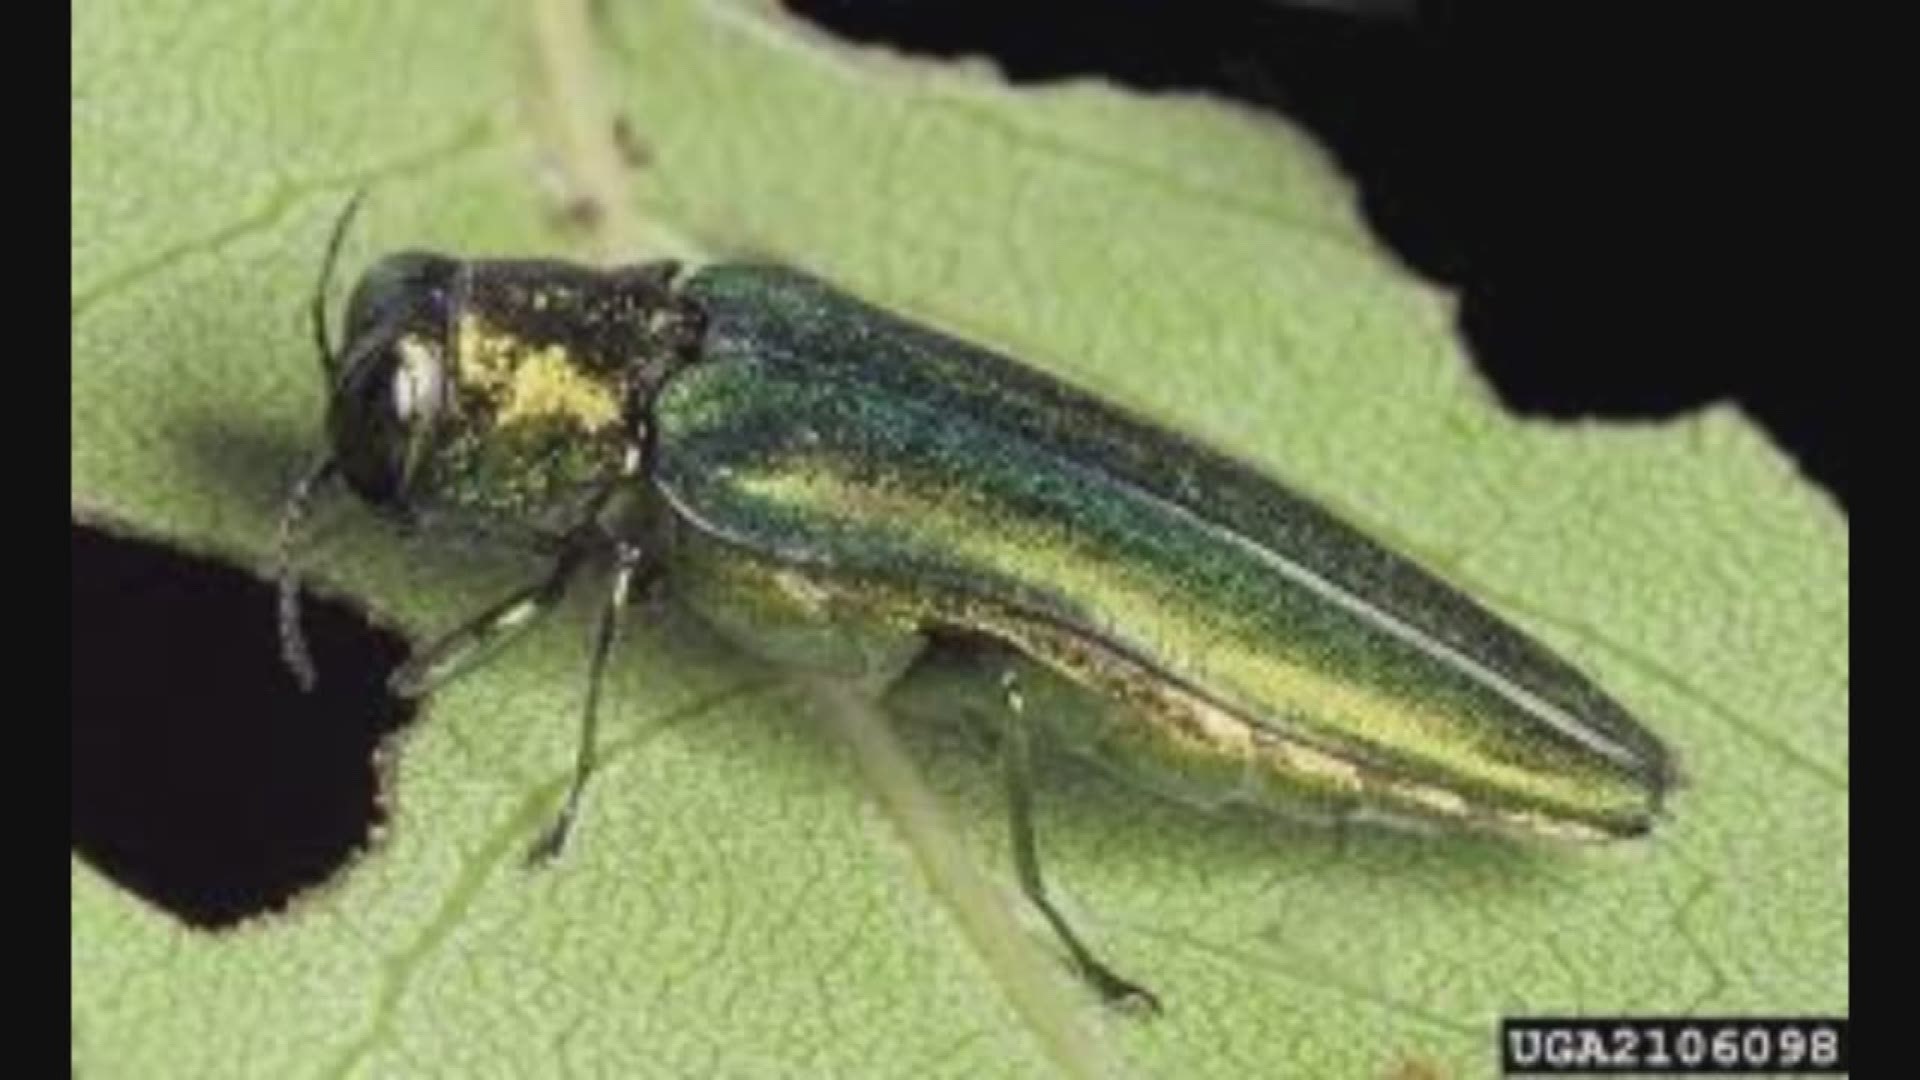 The U.S. Forest Service said the invasive, destructive pest was found in a tree in Broomfield.